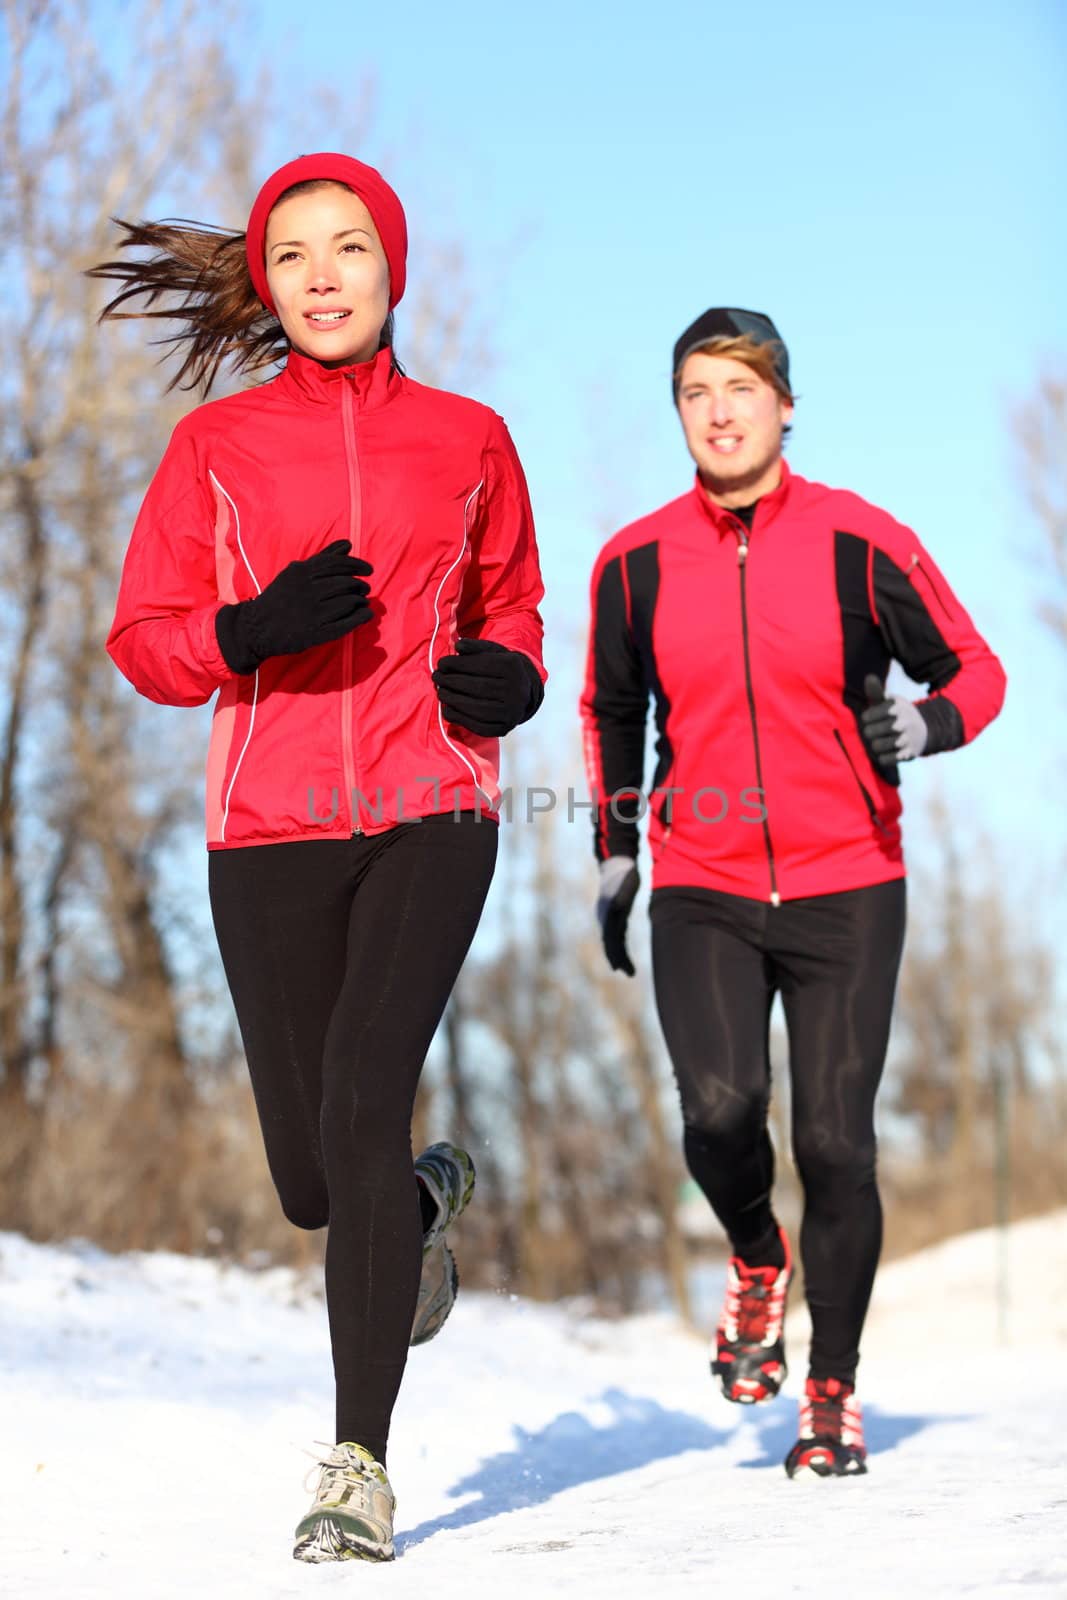 Sport couple running in winter snow. Woman and man runners jogging outdoors. Healthy fitness lifestyle concept with happy smiling young multiracial couple.